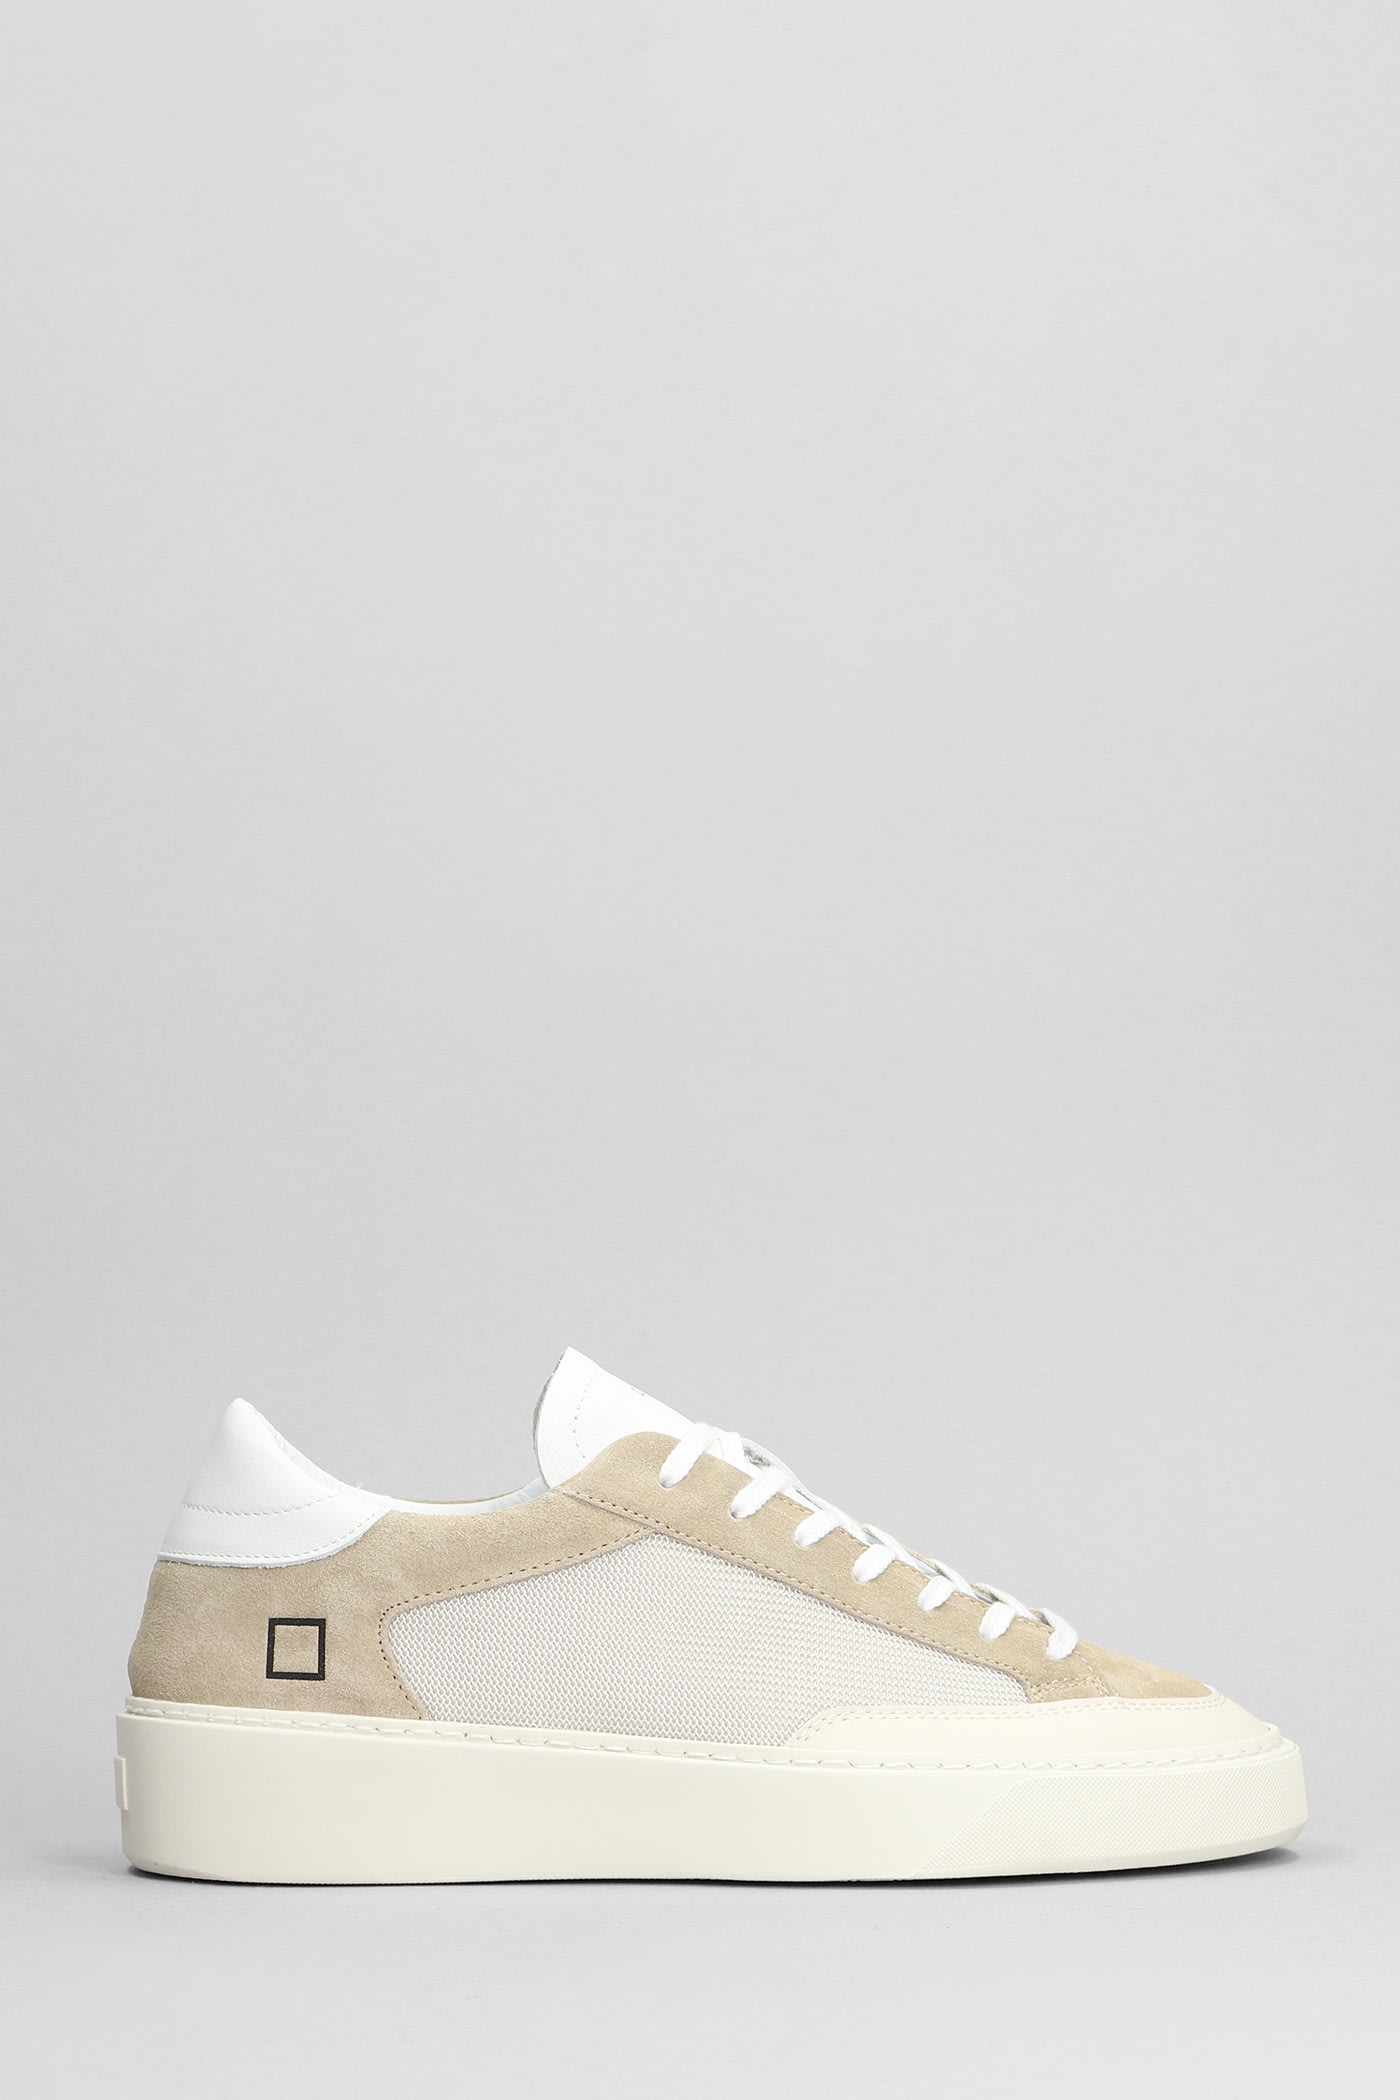 Shop Date Levante Dragon Sneakers In Beige Suede And Fabric